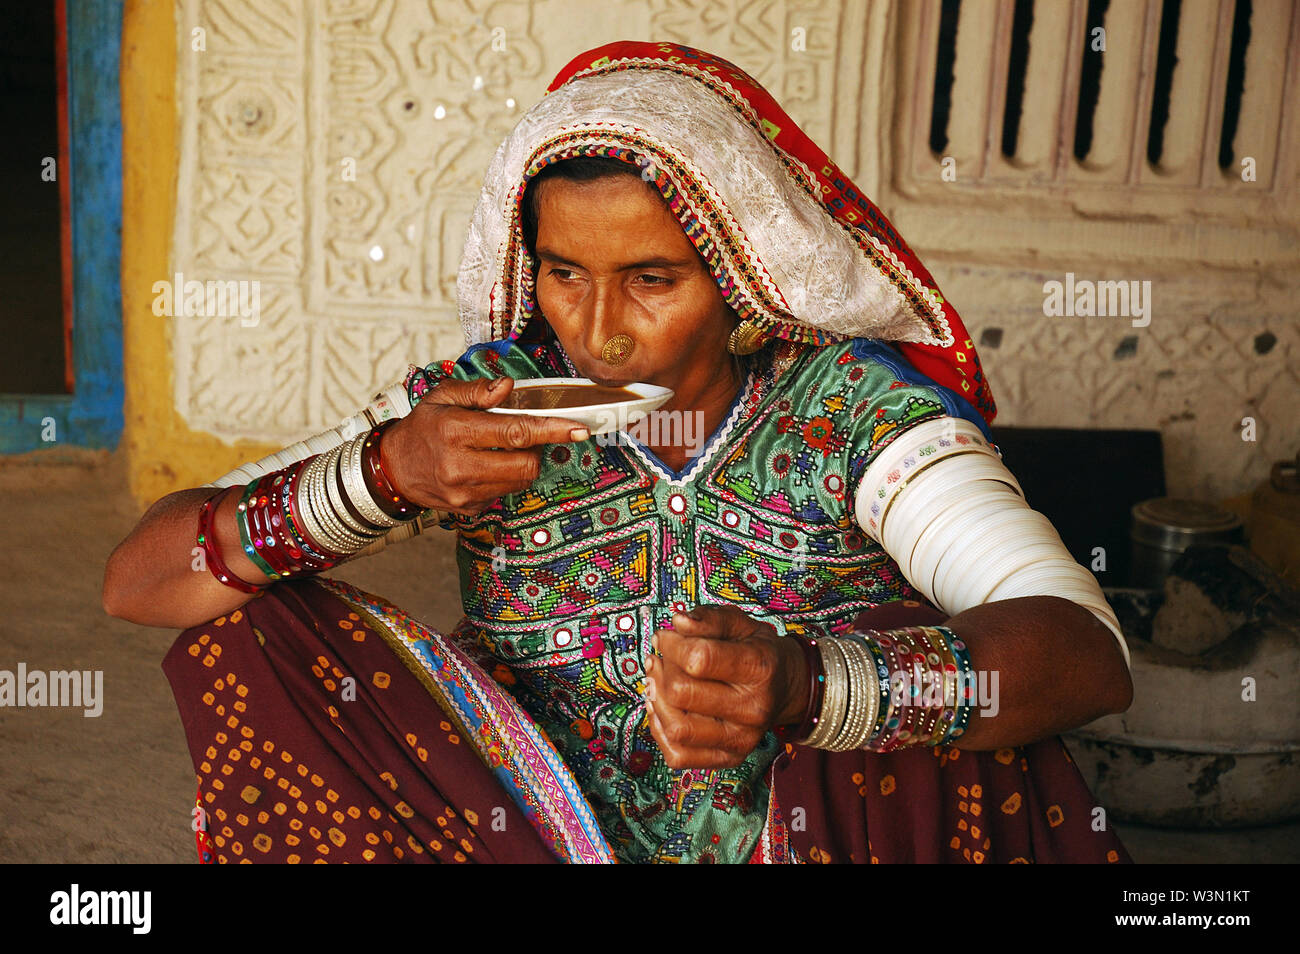 A woman from the ethnic Lambada community having tea at her hut in Bhuj in Gujrat, India. May 24, 2009. Stock Photo